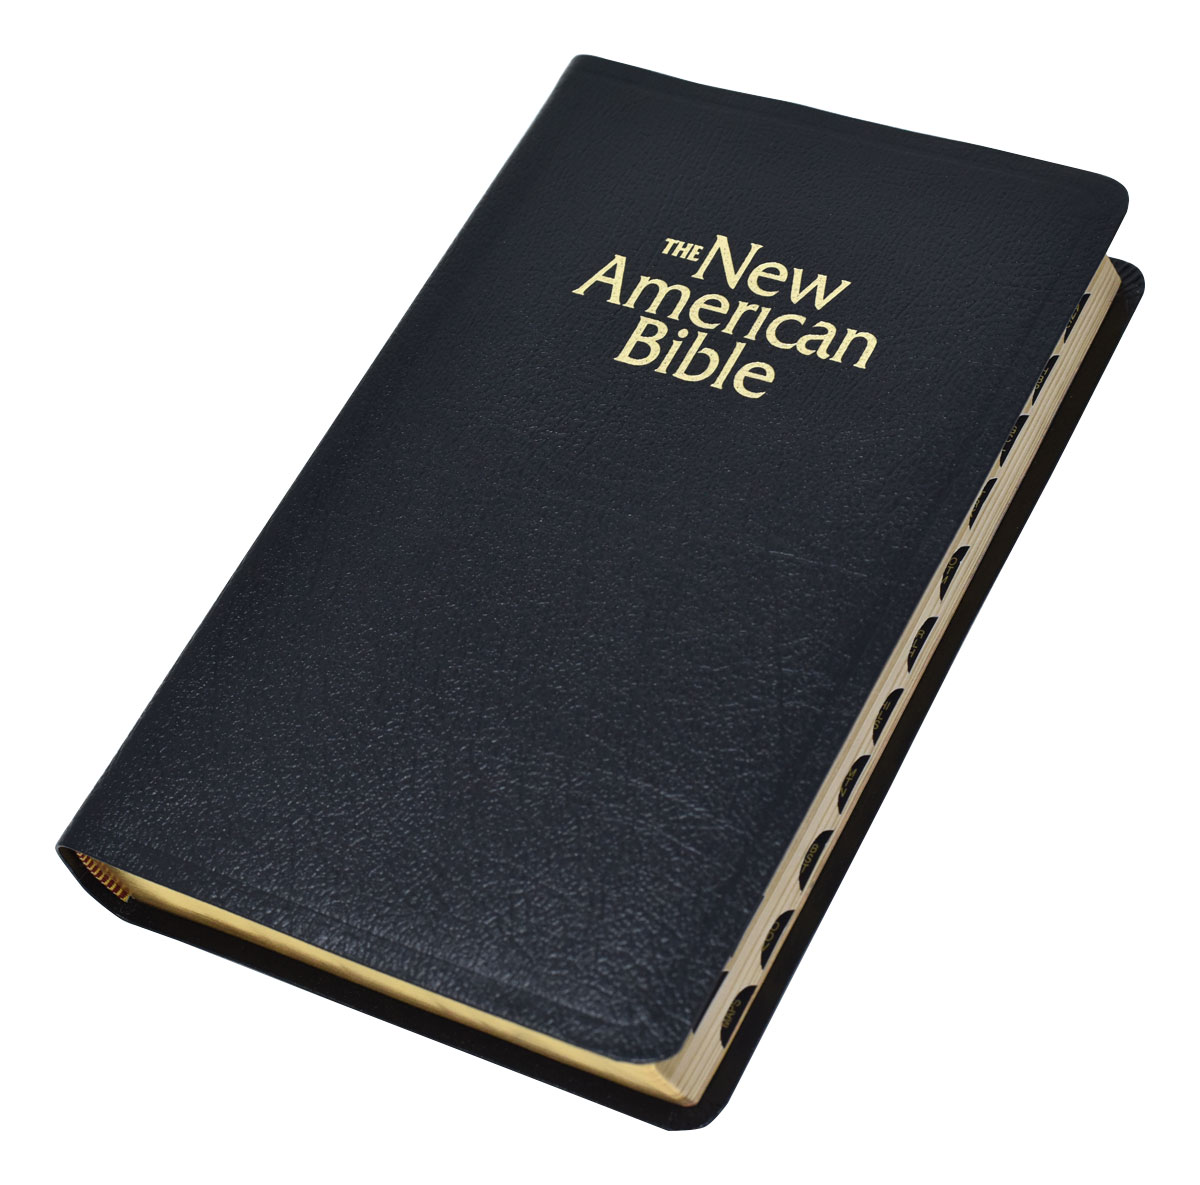 NABRE Deluxe Gift Bible Indexed (Burgundy Bonded Leather)